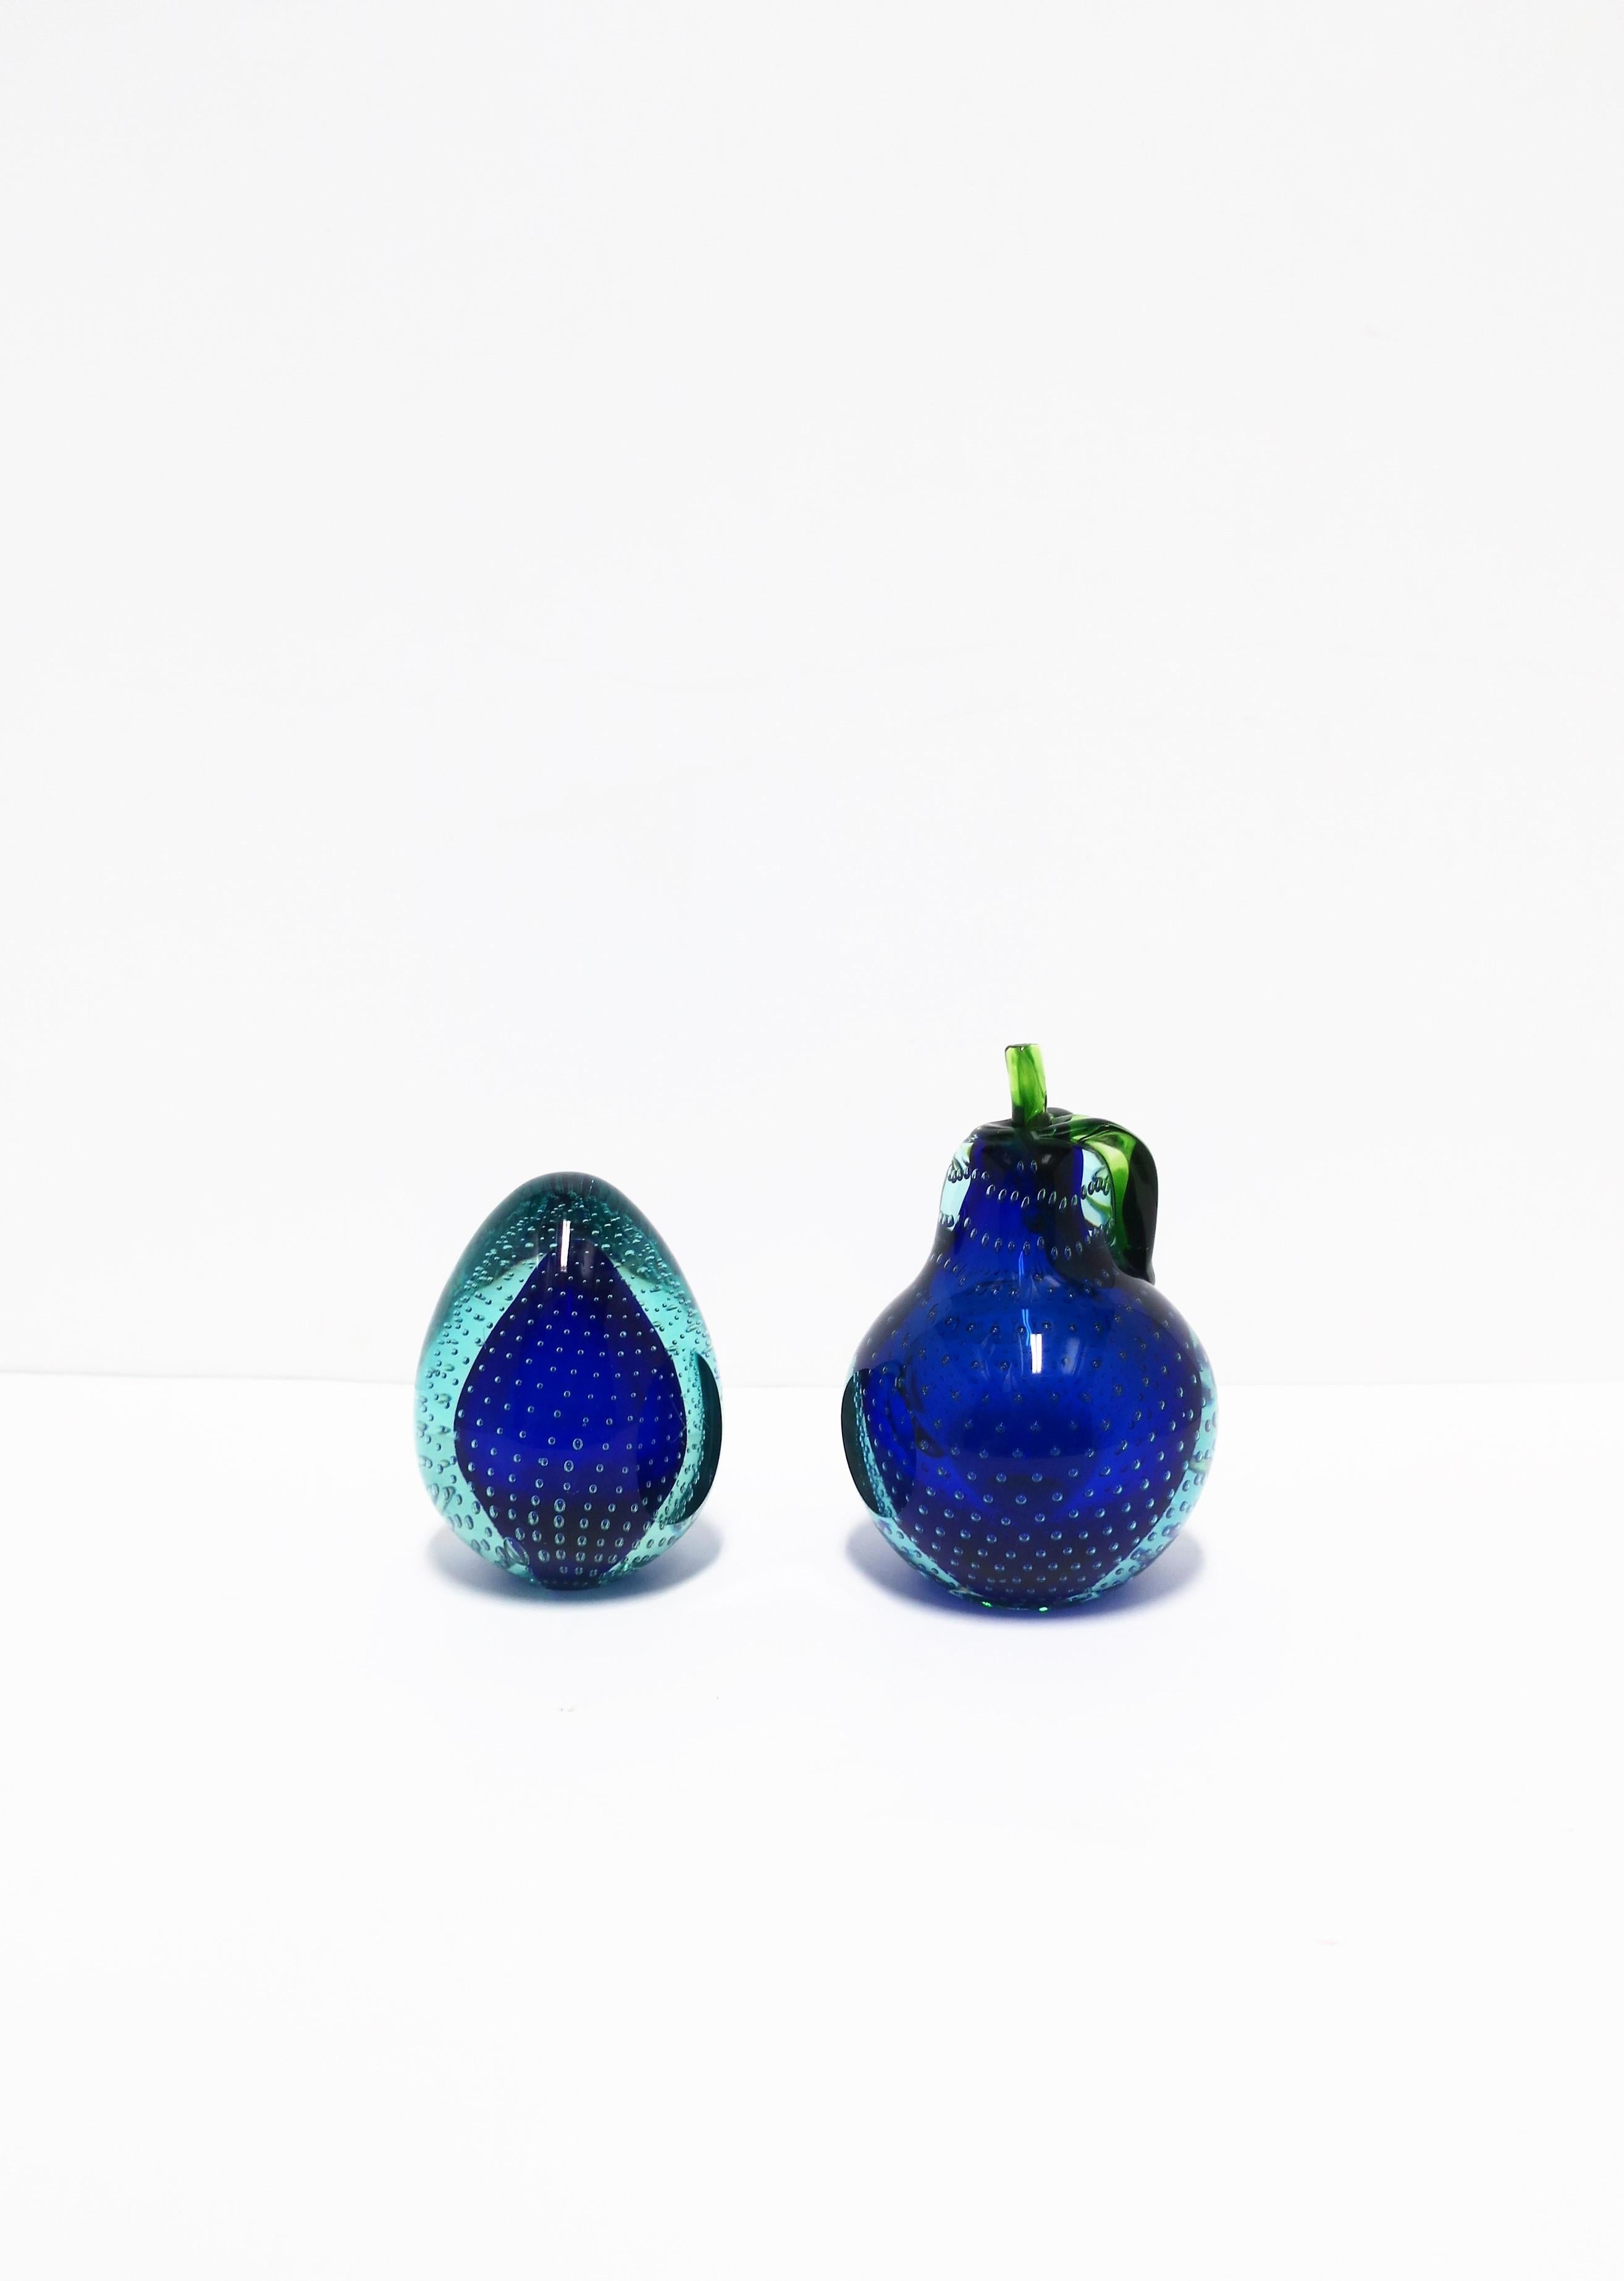 A beautiful and substantial set Italian Murano pear fruit and egg decorative art glass bookends or decorative objects with a controlled bubble design in the style of Italian designer Alfredo Barbini, modern style, late-20th century, Italy. Murano